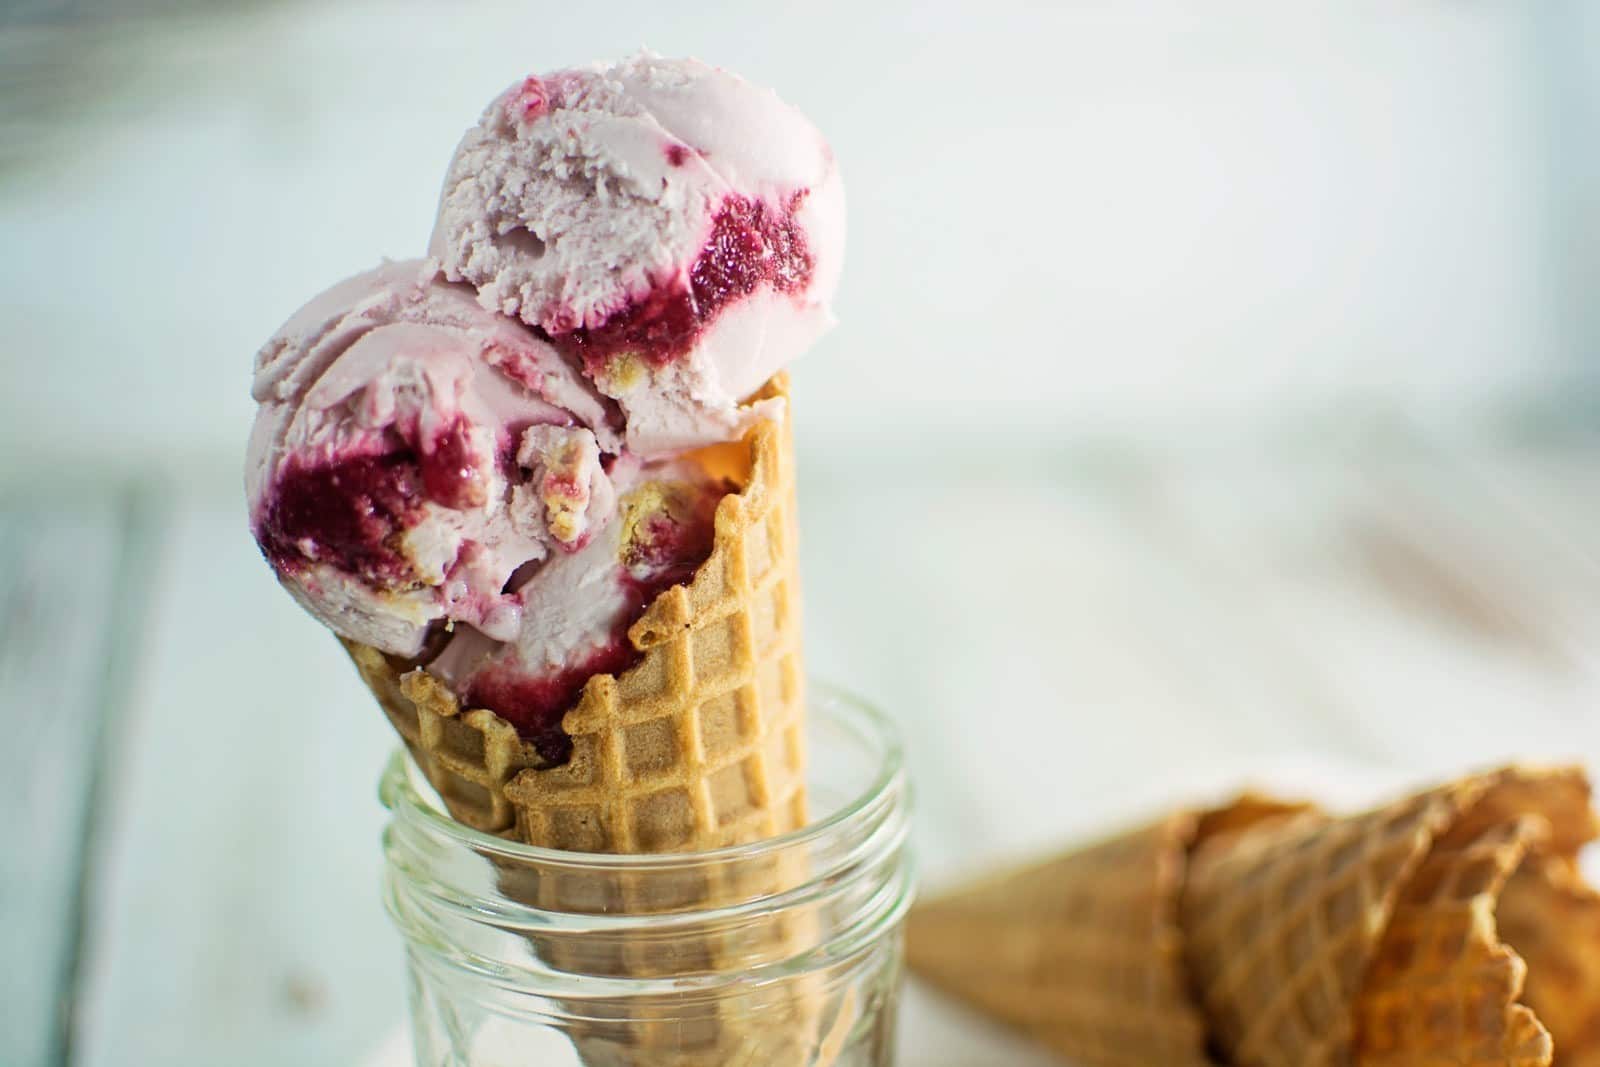 Stay cool with this absolute creamy Raspberry Swirled Cheesecake Ice Cream! Recipe found @LittleFiggyFood